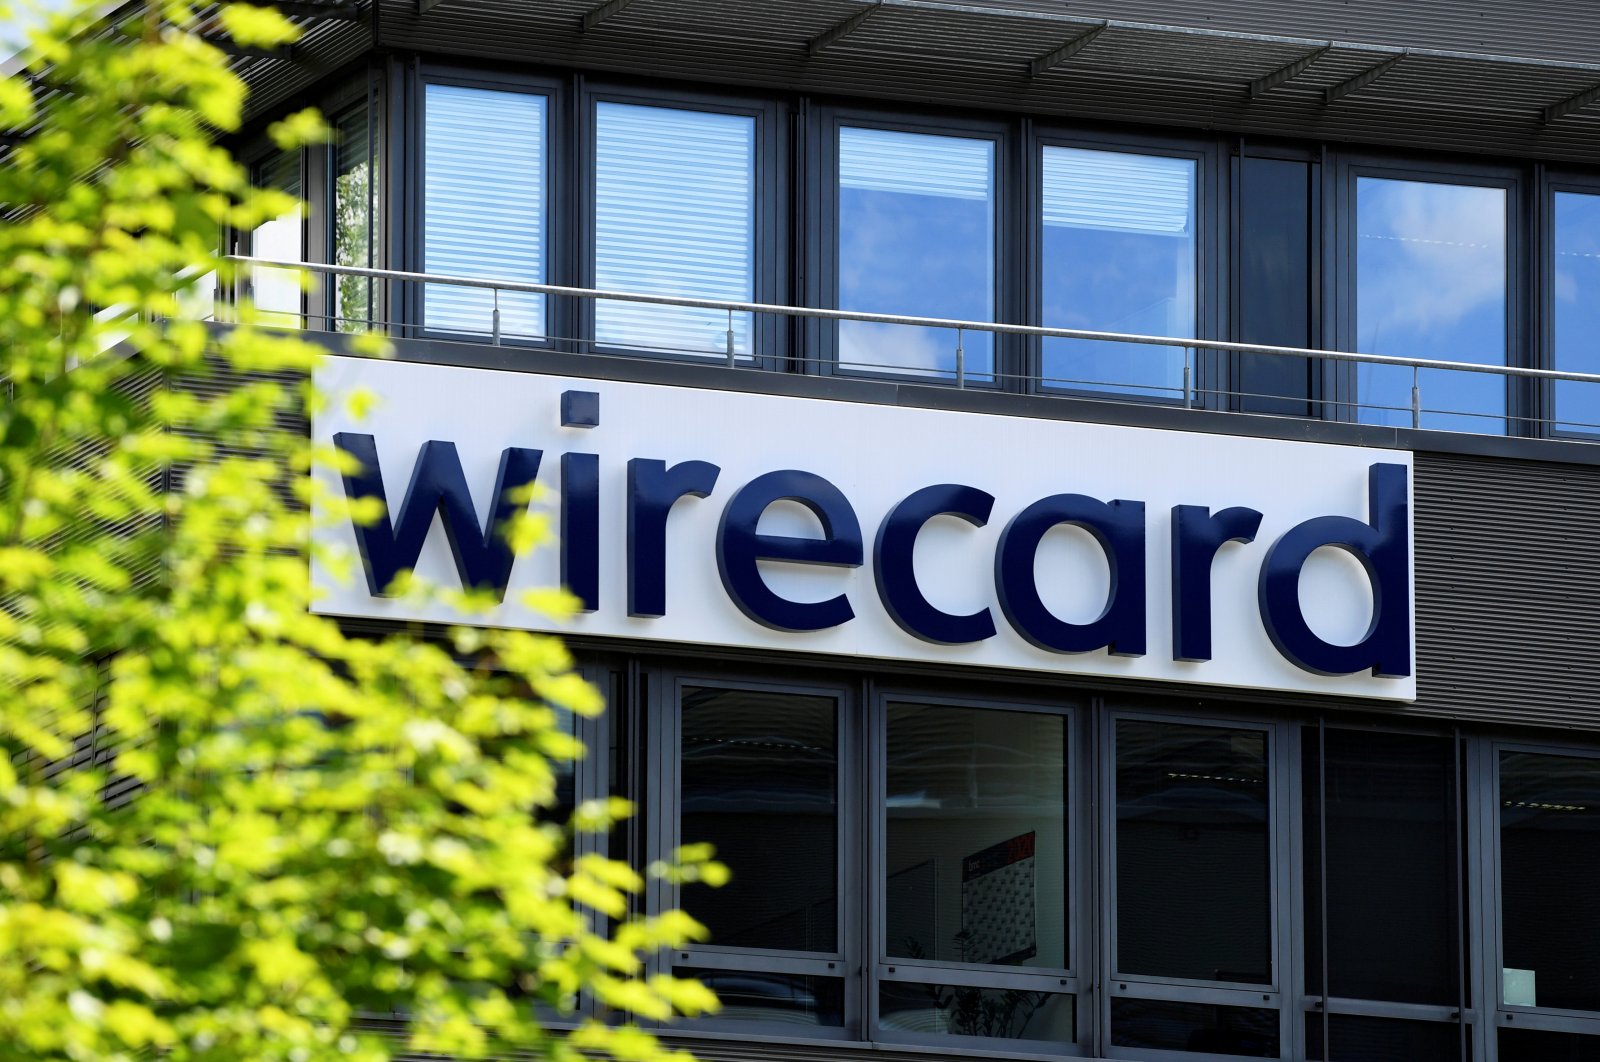 The logo of Wirecard is pictured at its headquarters in Aschheim, near Munich, Germany, July 1, 2020. (Reuters Photo)